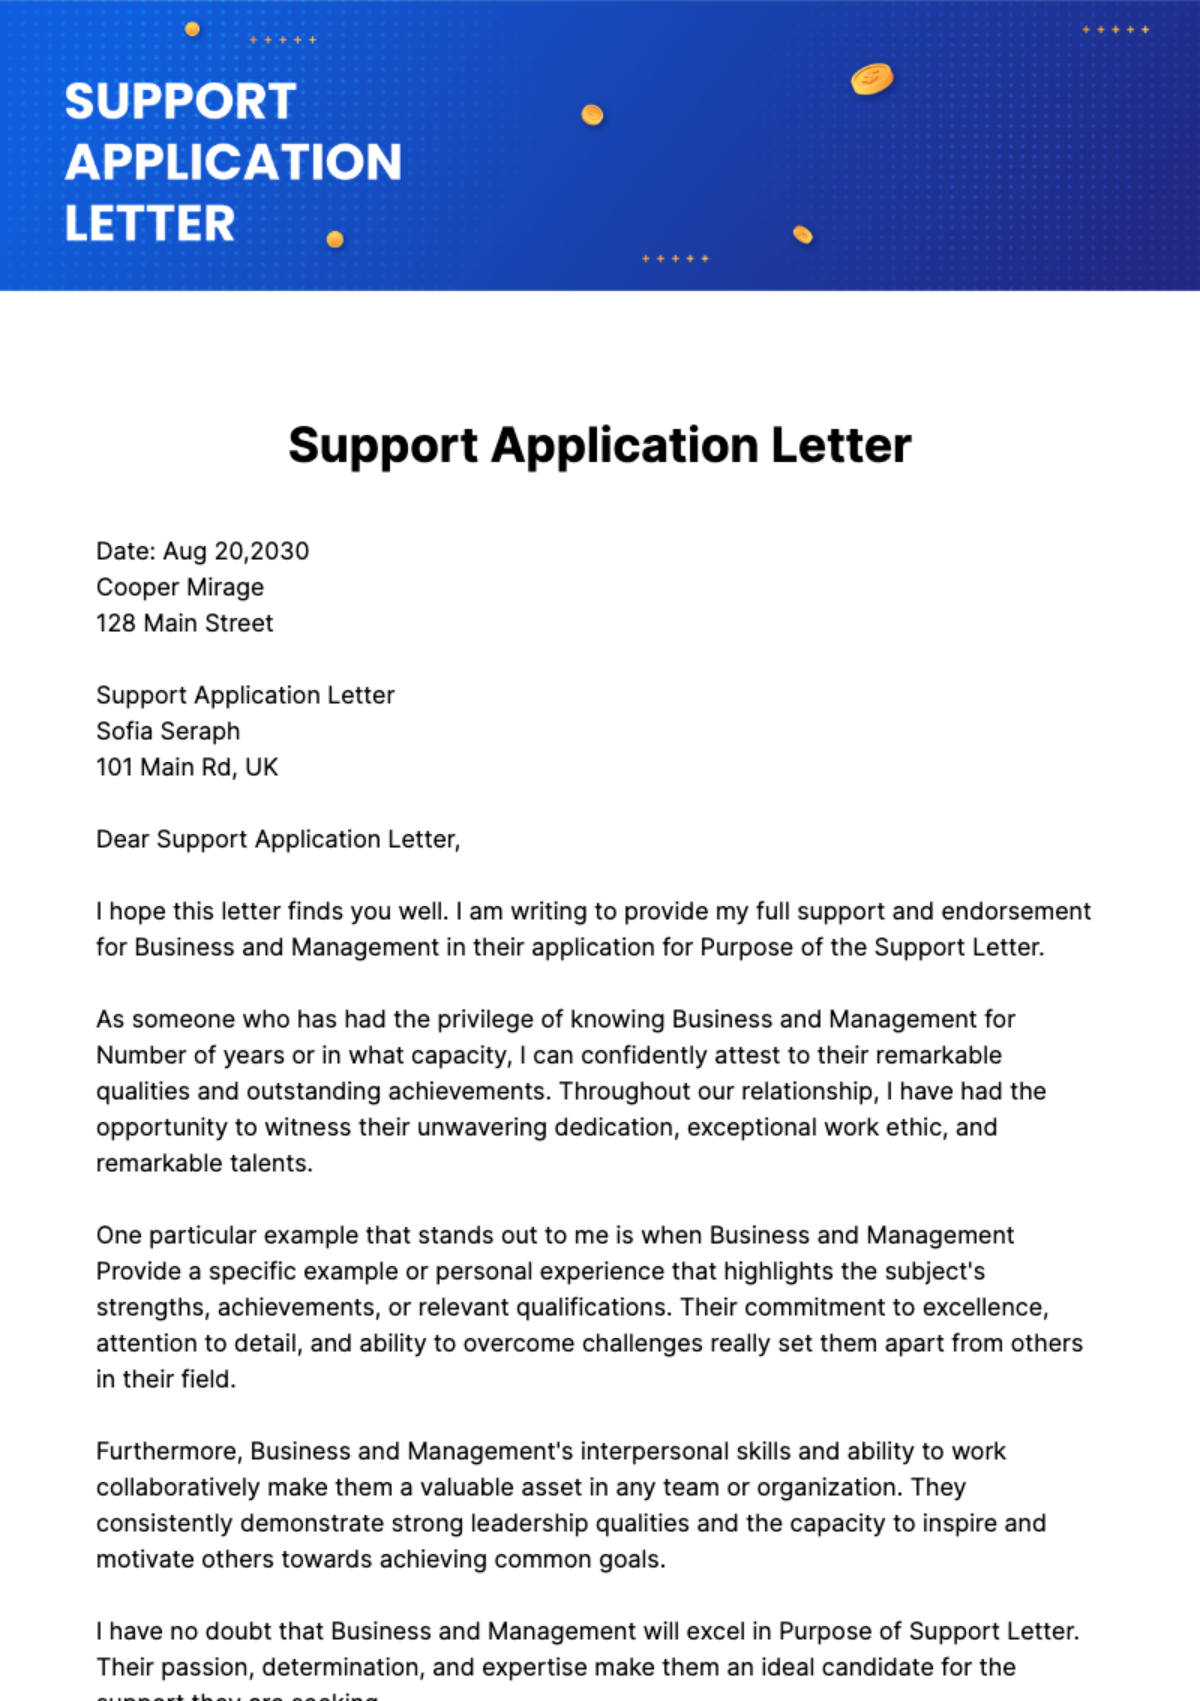 Support Application Letter Template